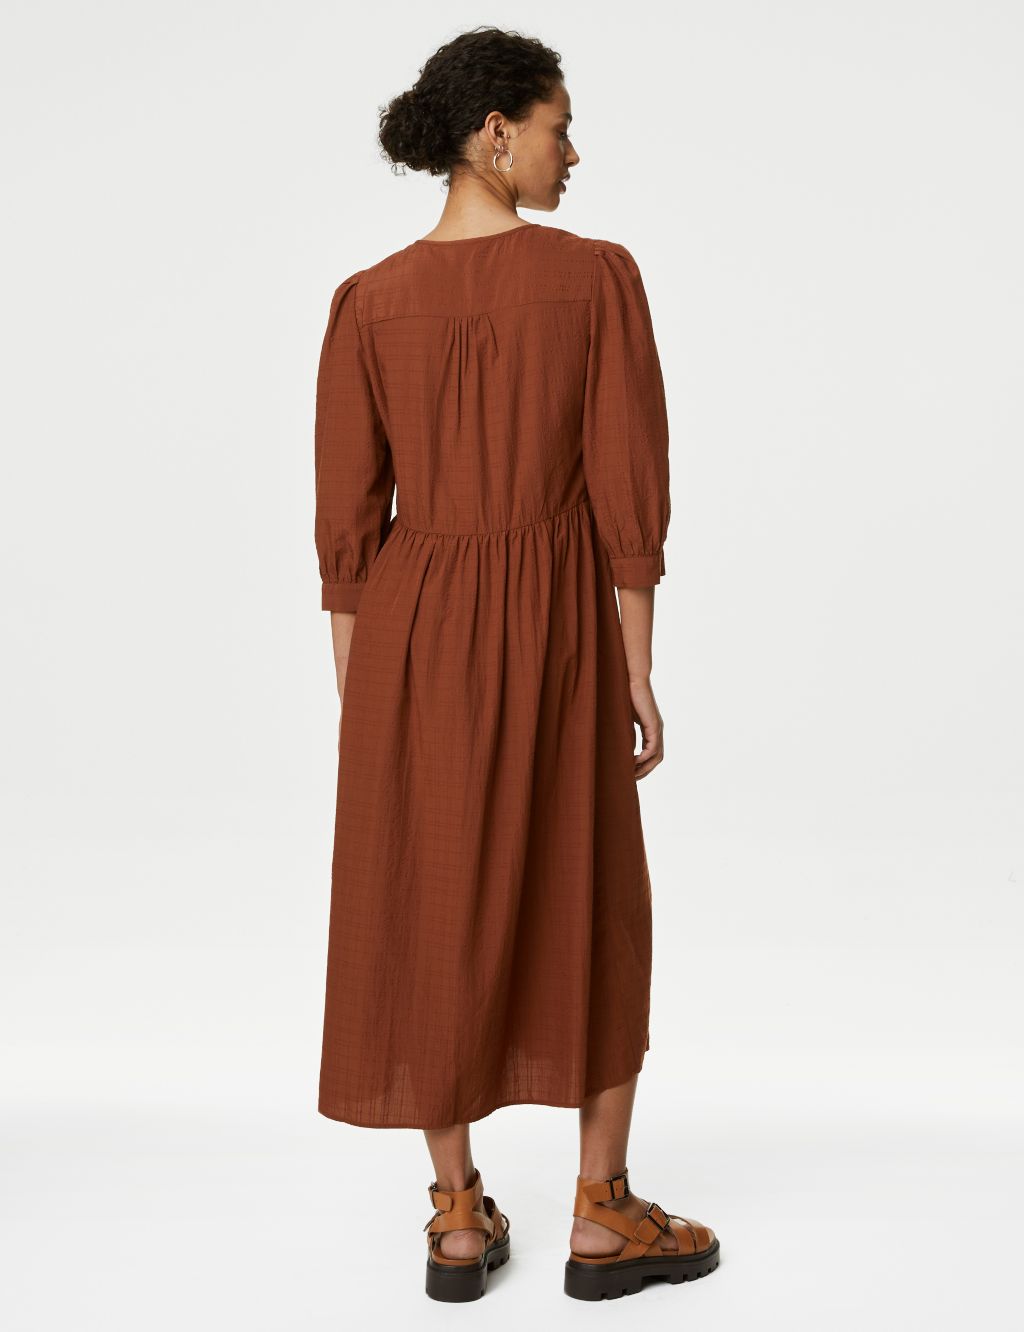 Textured Tie Neck Midi Relaxed Smock Dress image 4